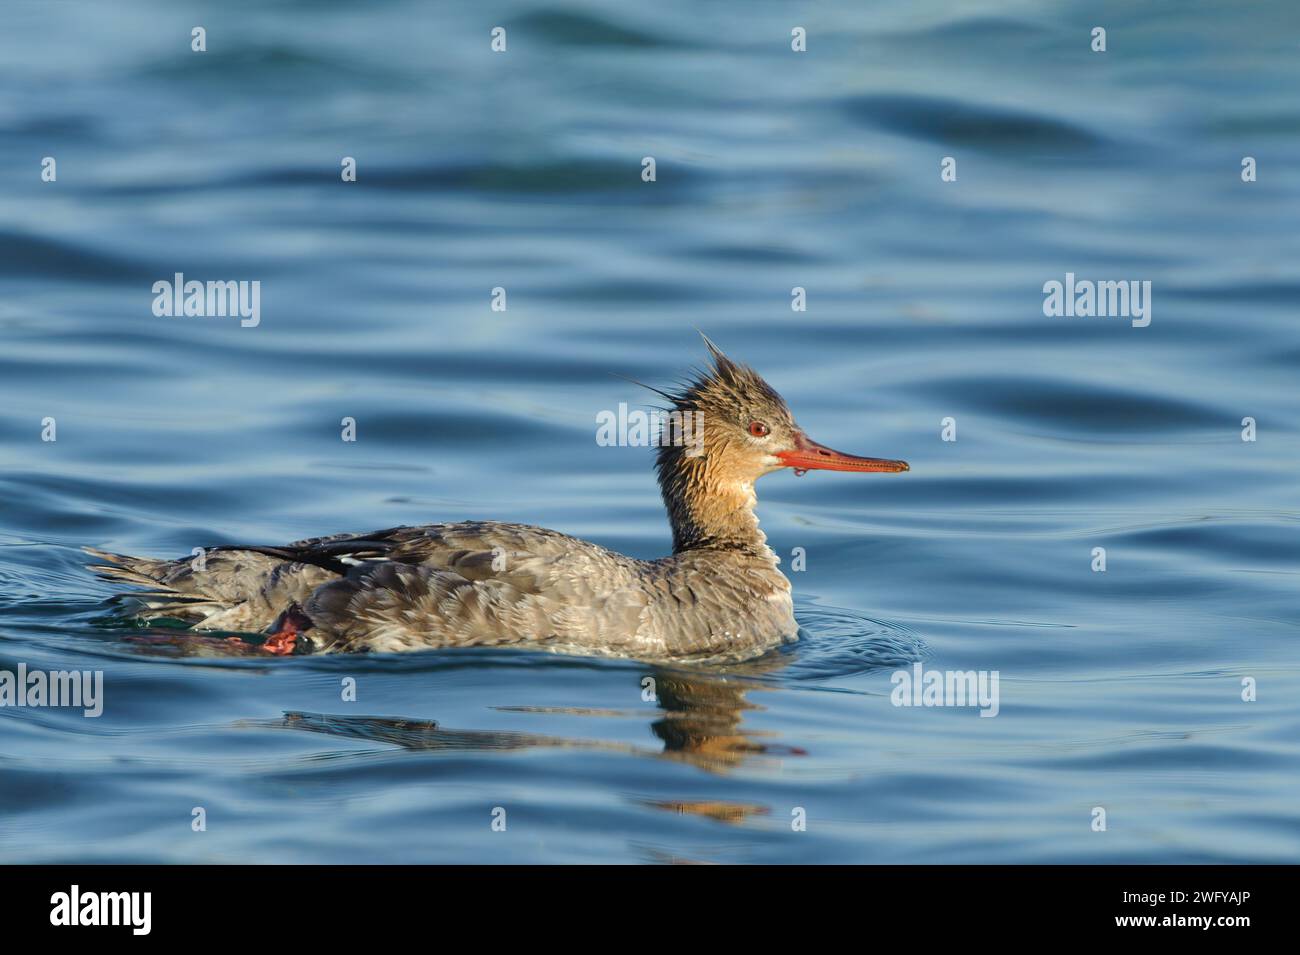 A red-breasted merganser female in the Smith River estuary in northern California. Stock Photo